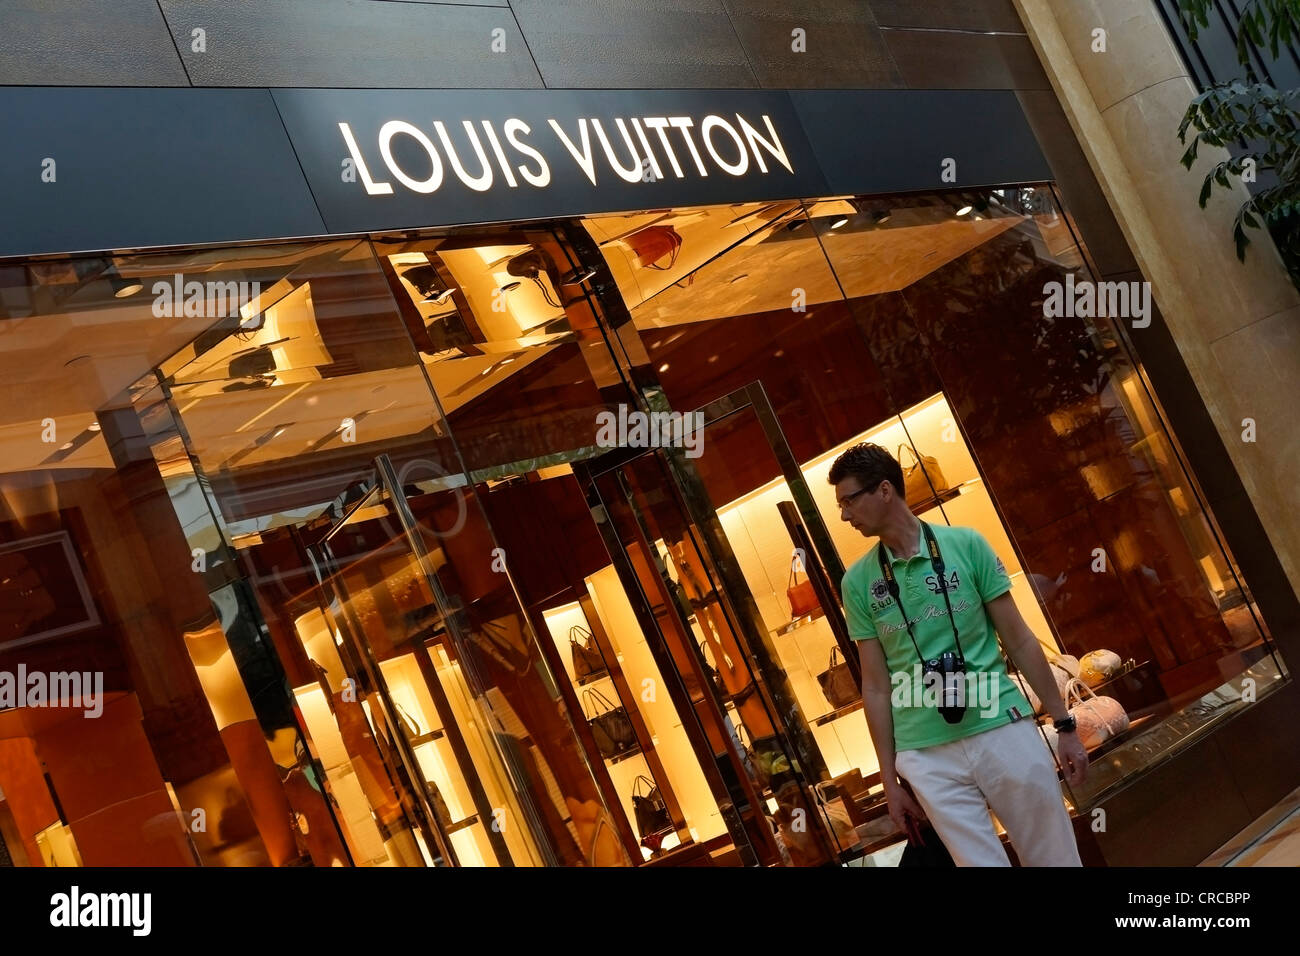 Louis Vuitton store, in Crystals Shopping Centre, Las Vegas Stock Photo: 48830510 - Alamy